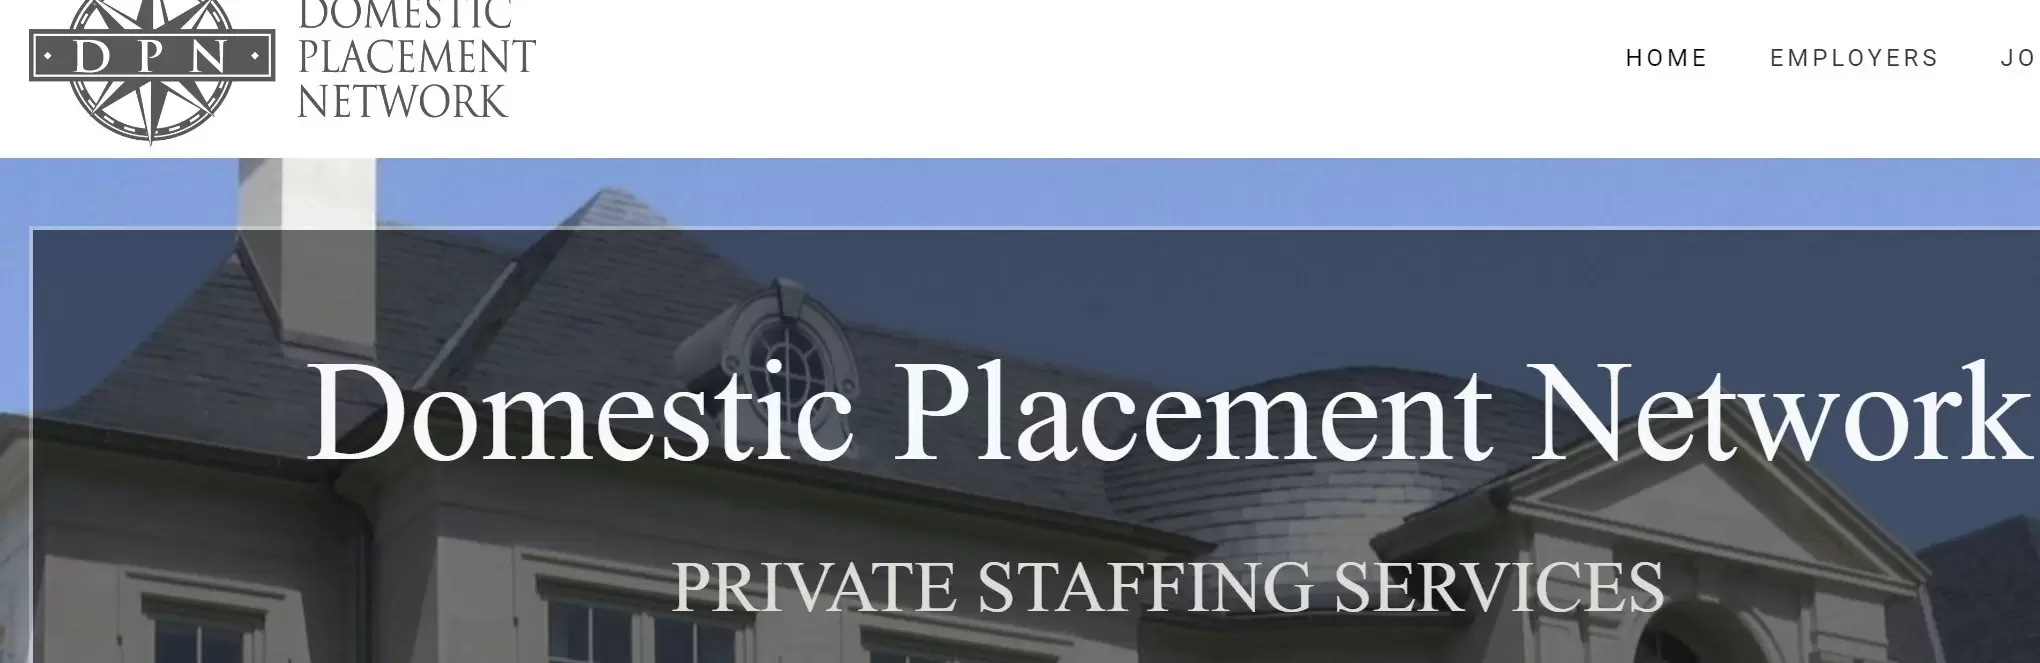 Domestic Placement Network: Company Profile & Reviews